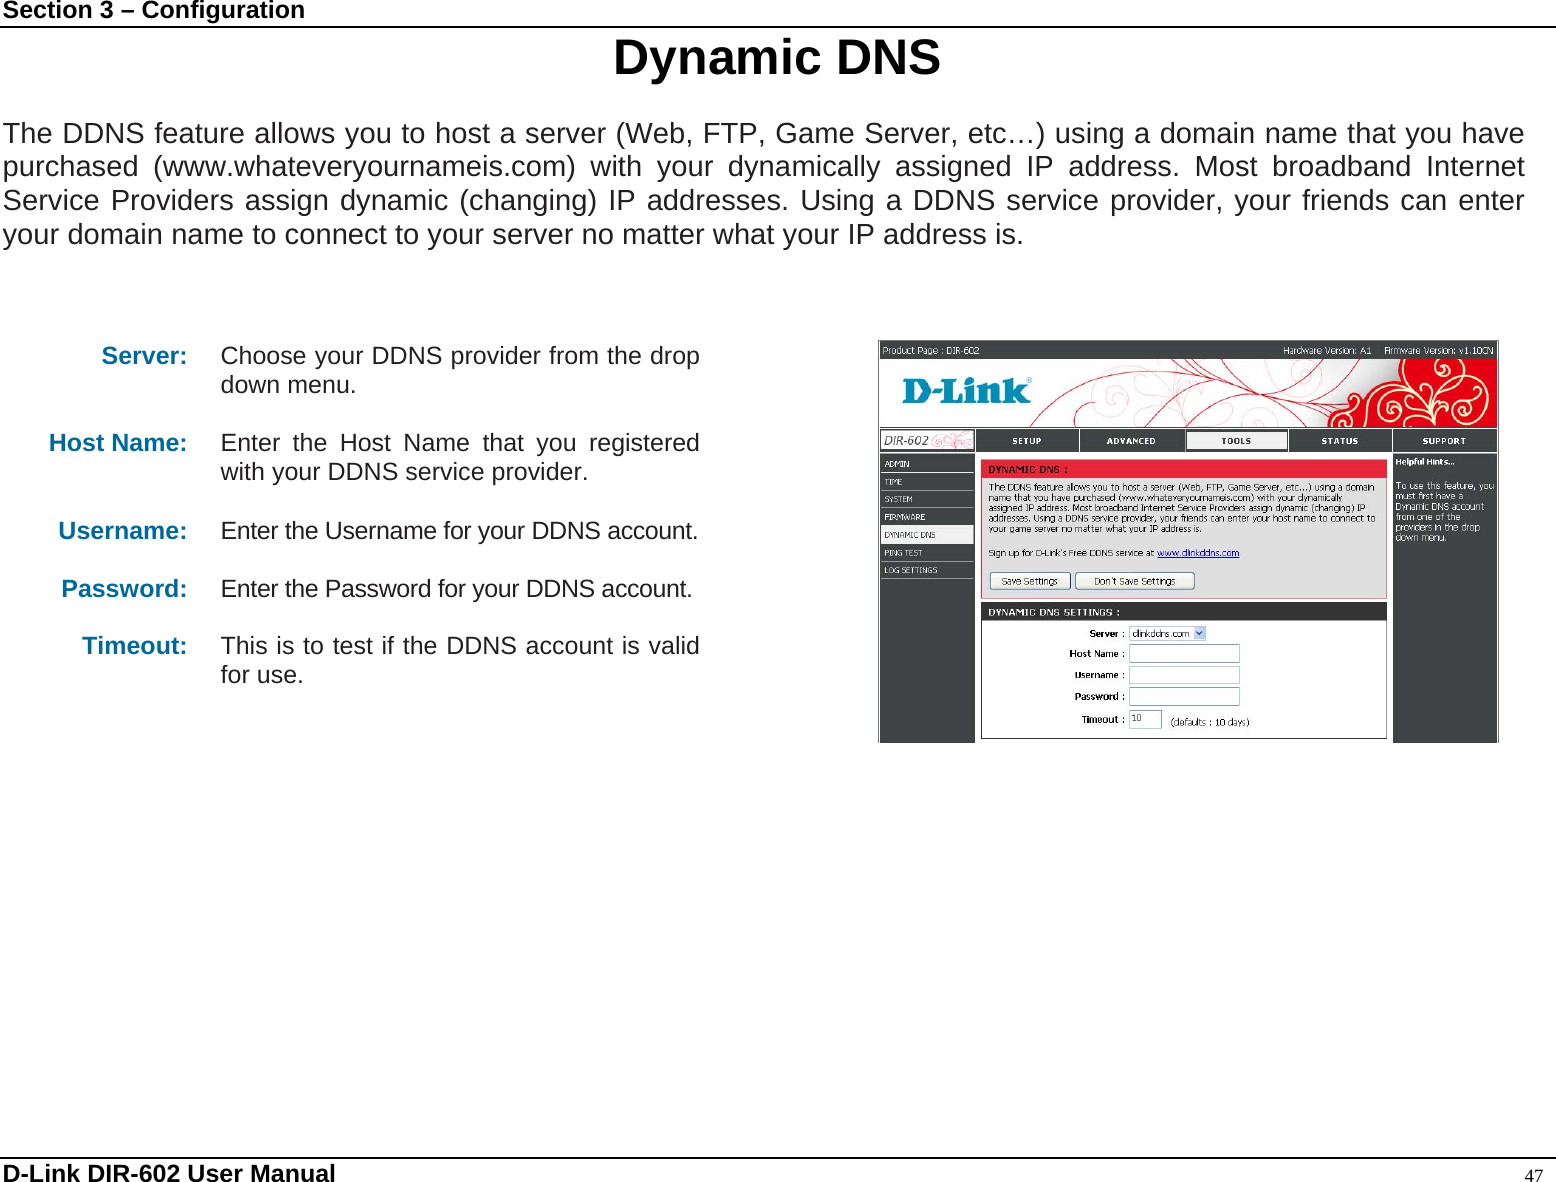 Section 3 – Configuration  Dynamic DNS  The DDNS feature allows you to host a server (Web, FTP, Game Server, etc…) using a domain name that you have purchased (www.whateveryournameis.com) with your dynamically assigned IP address. Most broadband Internet Service Providers assign dynamic (changing) IP addresses. Using a DDNS service provider, your friends can enter your domain name to connect to your server no matter what your IP address is.    Server:  Choose your DDNS provider from the drop down menu.  Host Name:  Enter the Host Name that you registered with your DDNS service provider.  Username:  Enter the Username for your DDNS account. Password:  Enter the Password for your DDNS account.  Timeout:  This is to test if the DDNS account is valid for use.      D-Link DIR-602 User Manual                                                                                               47 